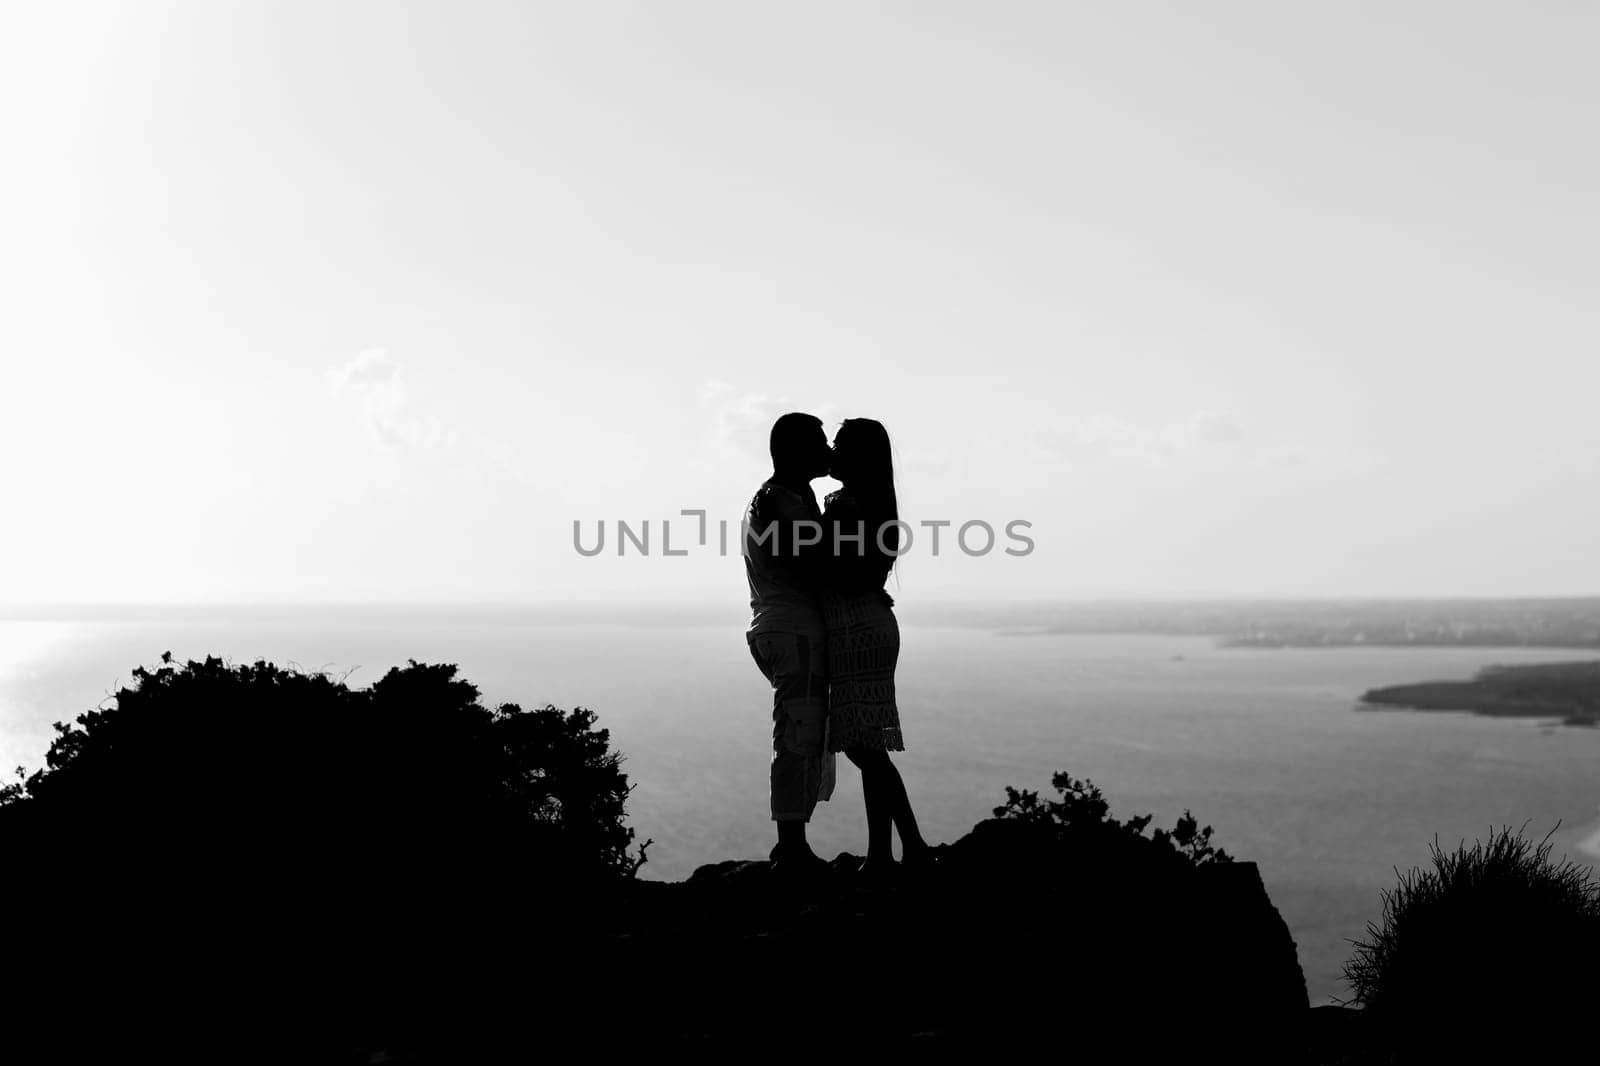 silhouette happiness and romantic scene of love couples partners on top of the mountain